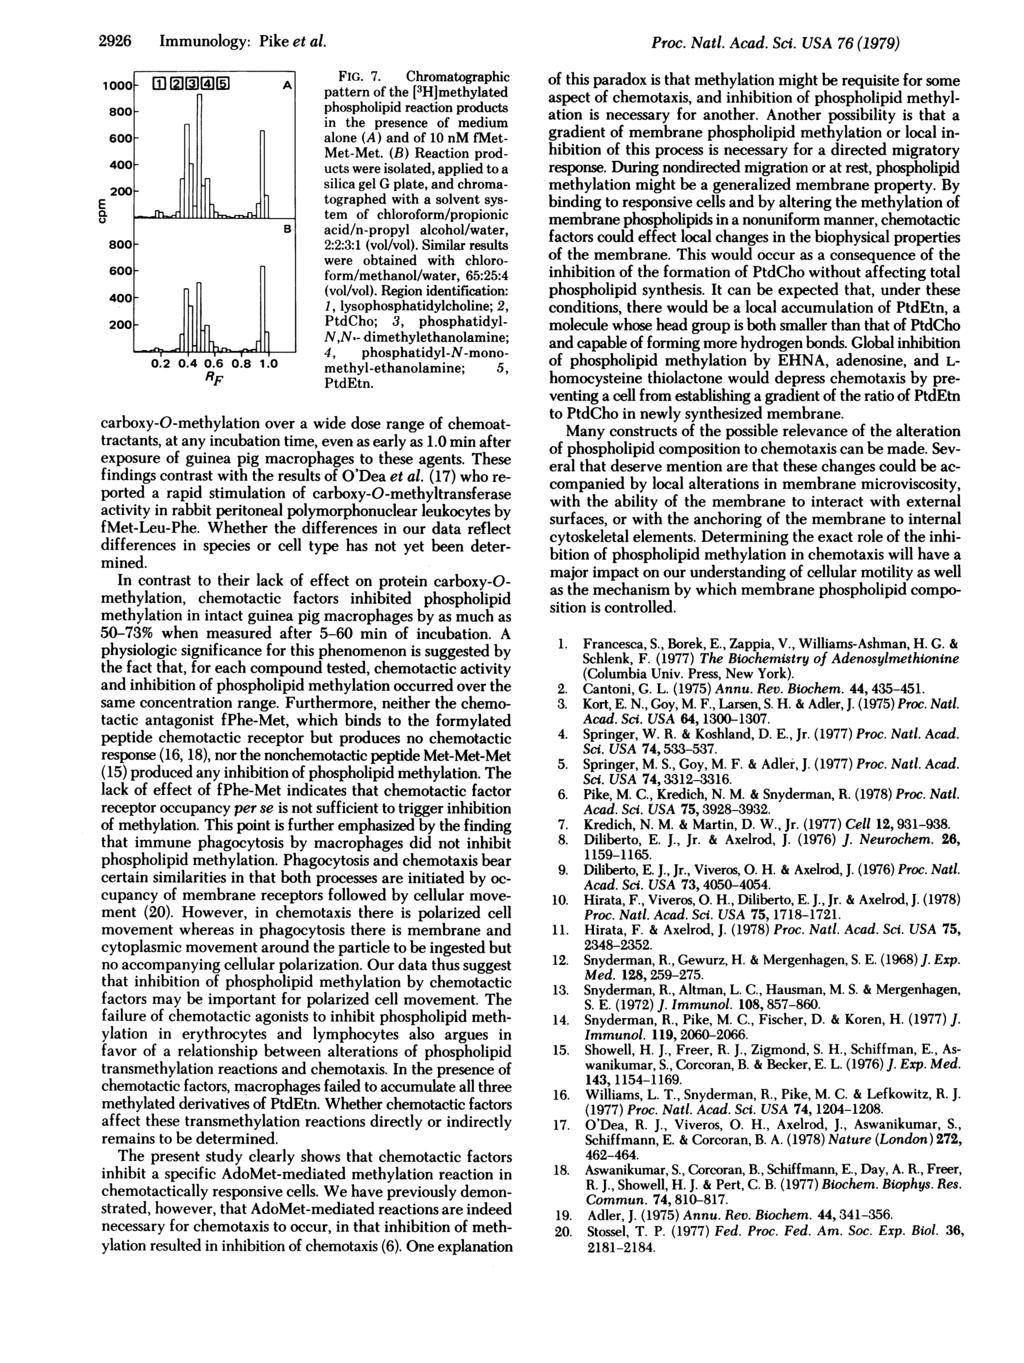 2926 Immunology: Pike et al. 1 m IIl] A FIG. 7. hromatographi pattern of the [3H]methylated 8 phospholipid reation produts in the presene of medium 6 alone (A) and of 1 nm fmet MetMet.